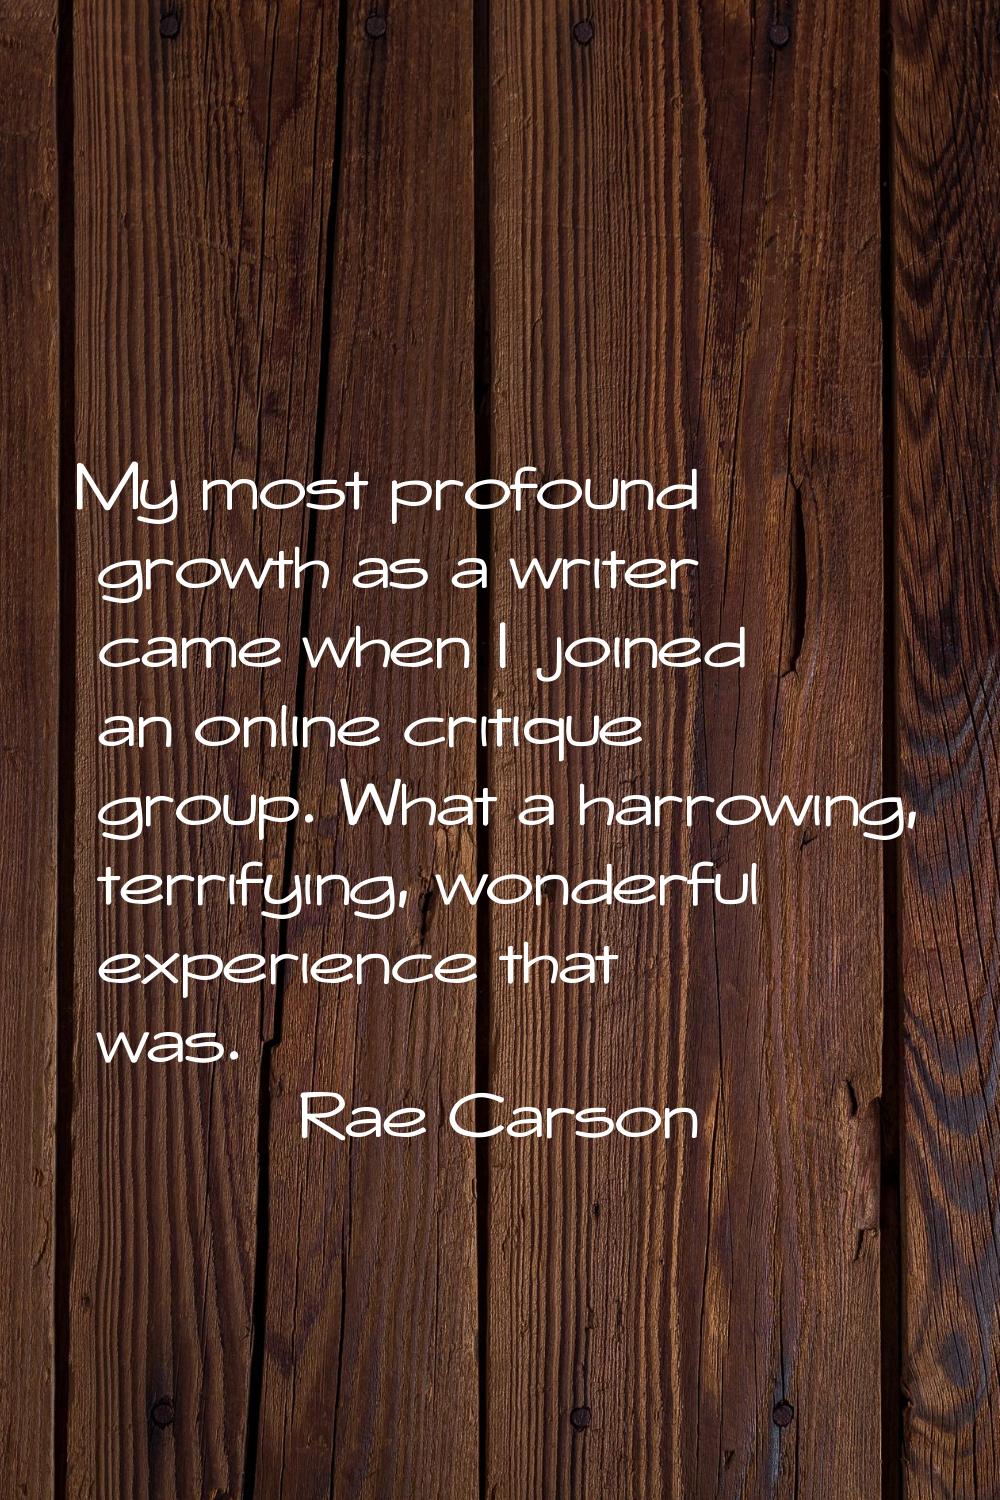 My most profound growth as a writer came when I joined an online critique group. What a harrowing, 